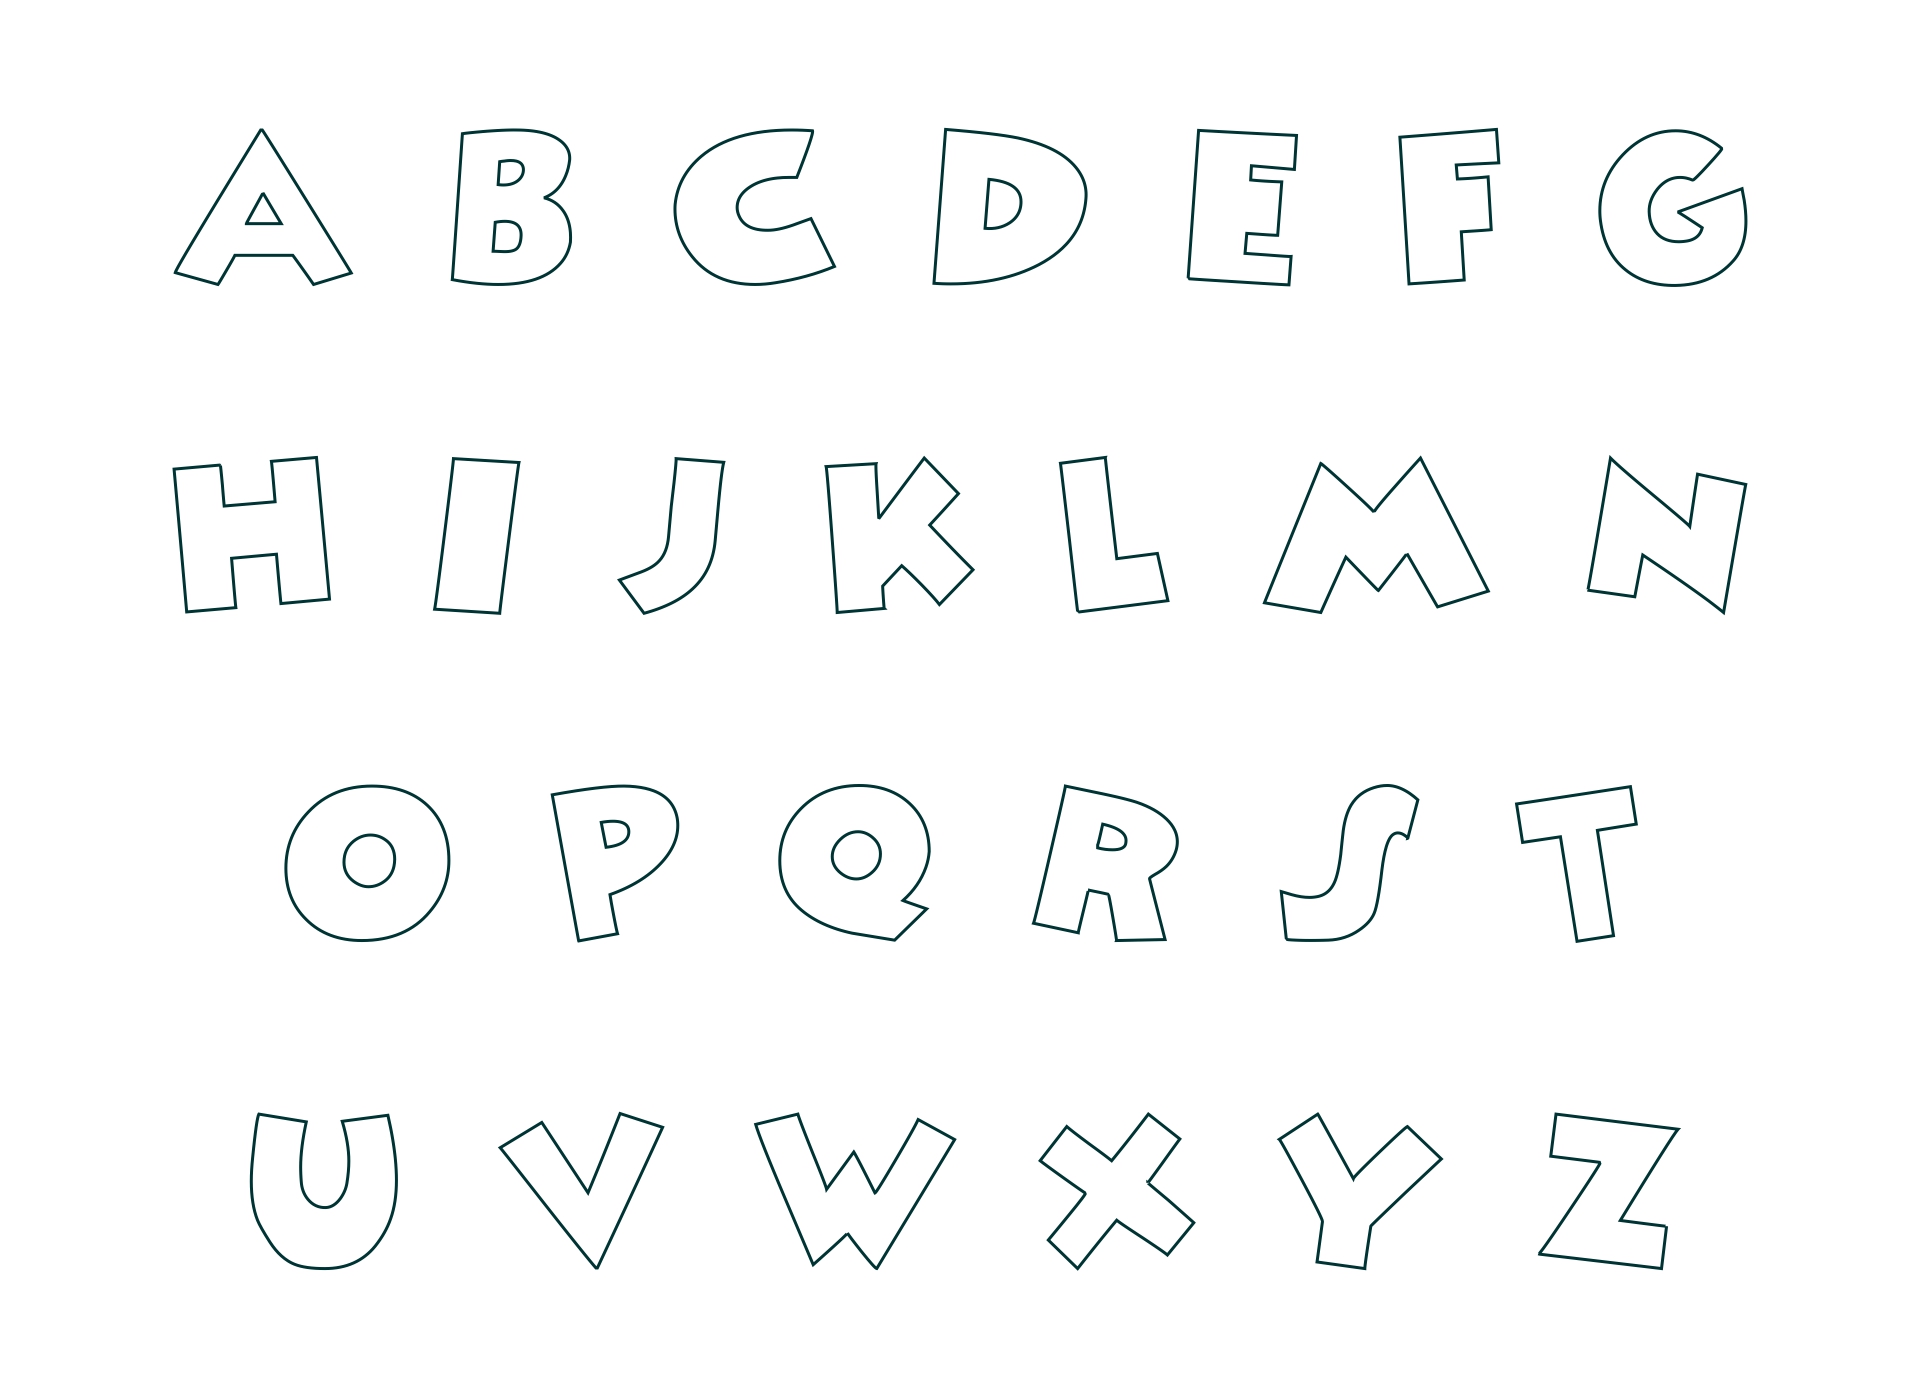 Alphabet Letters Free Printable Stencils To Cut Out 7 Best Images Of